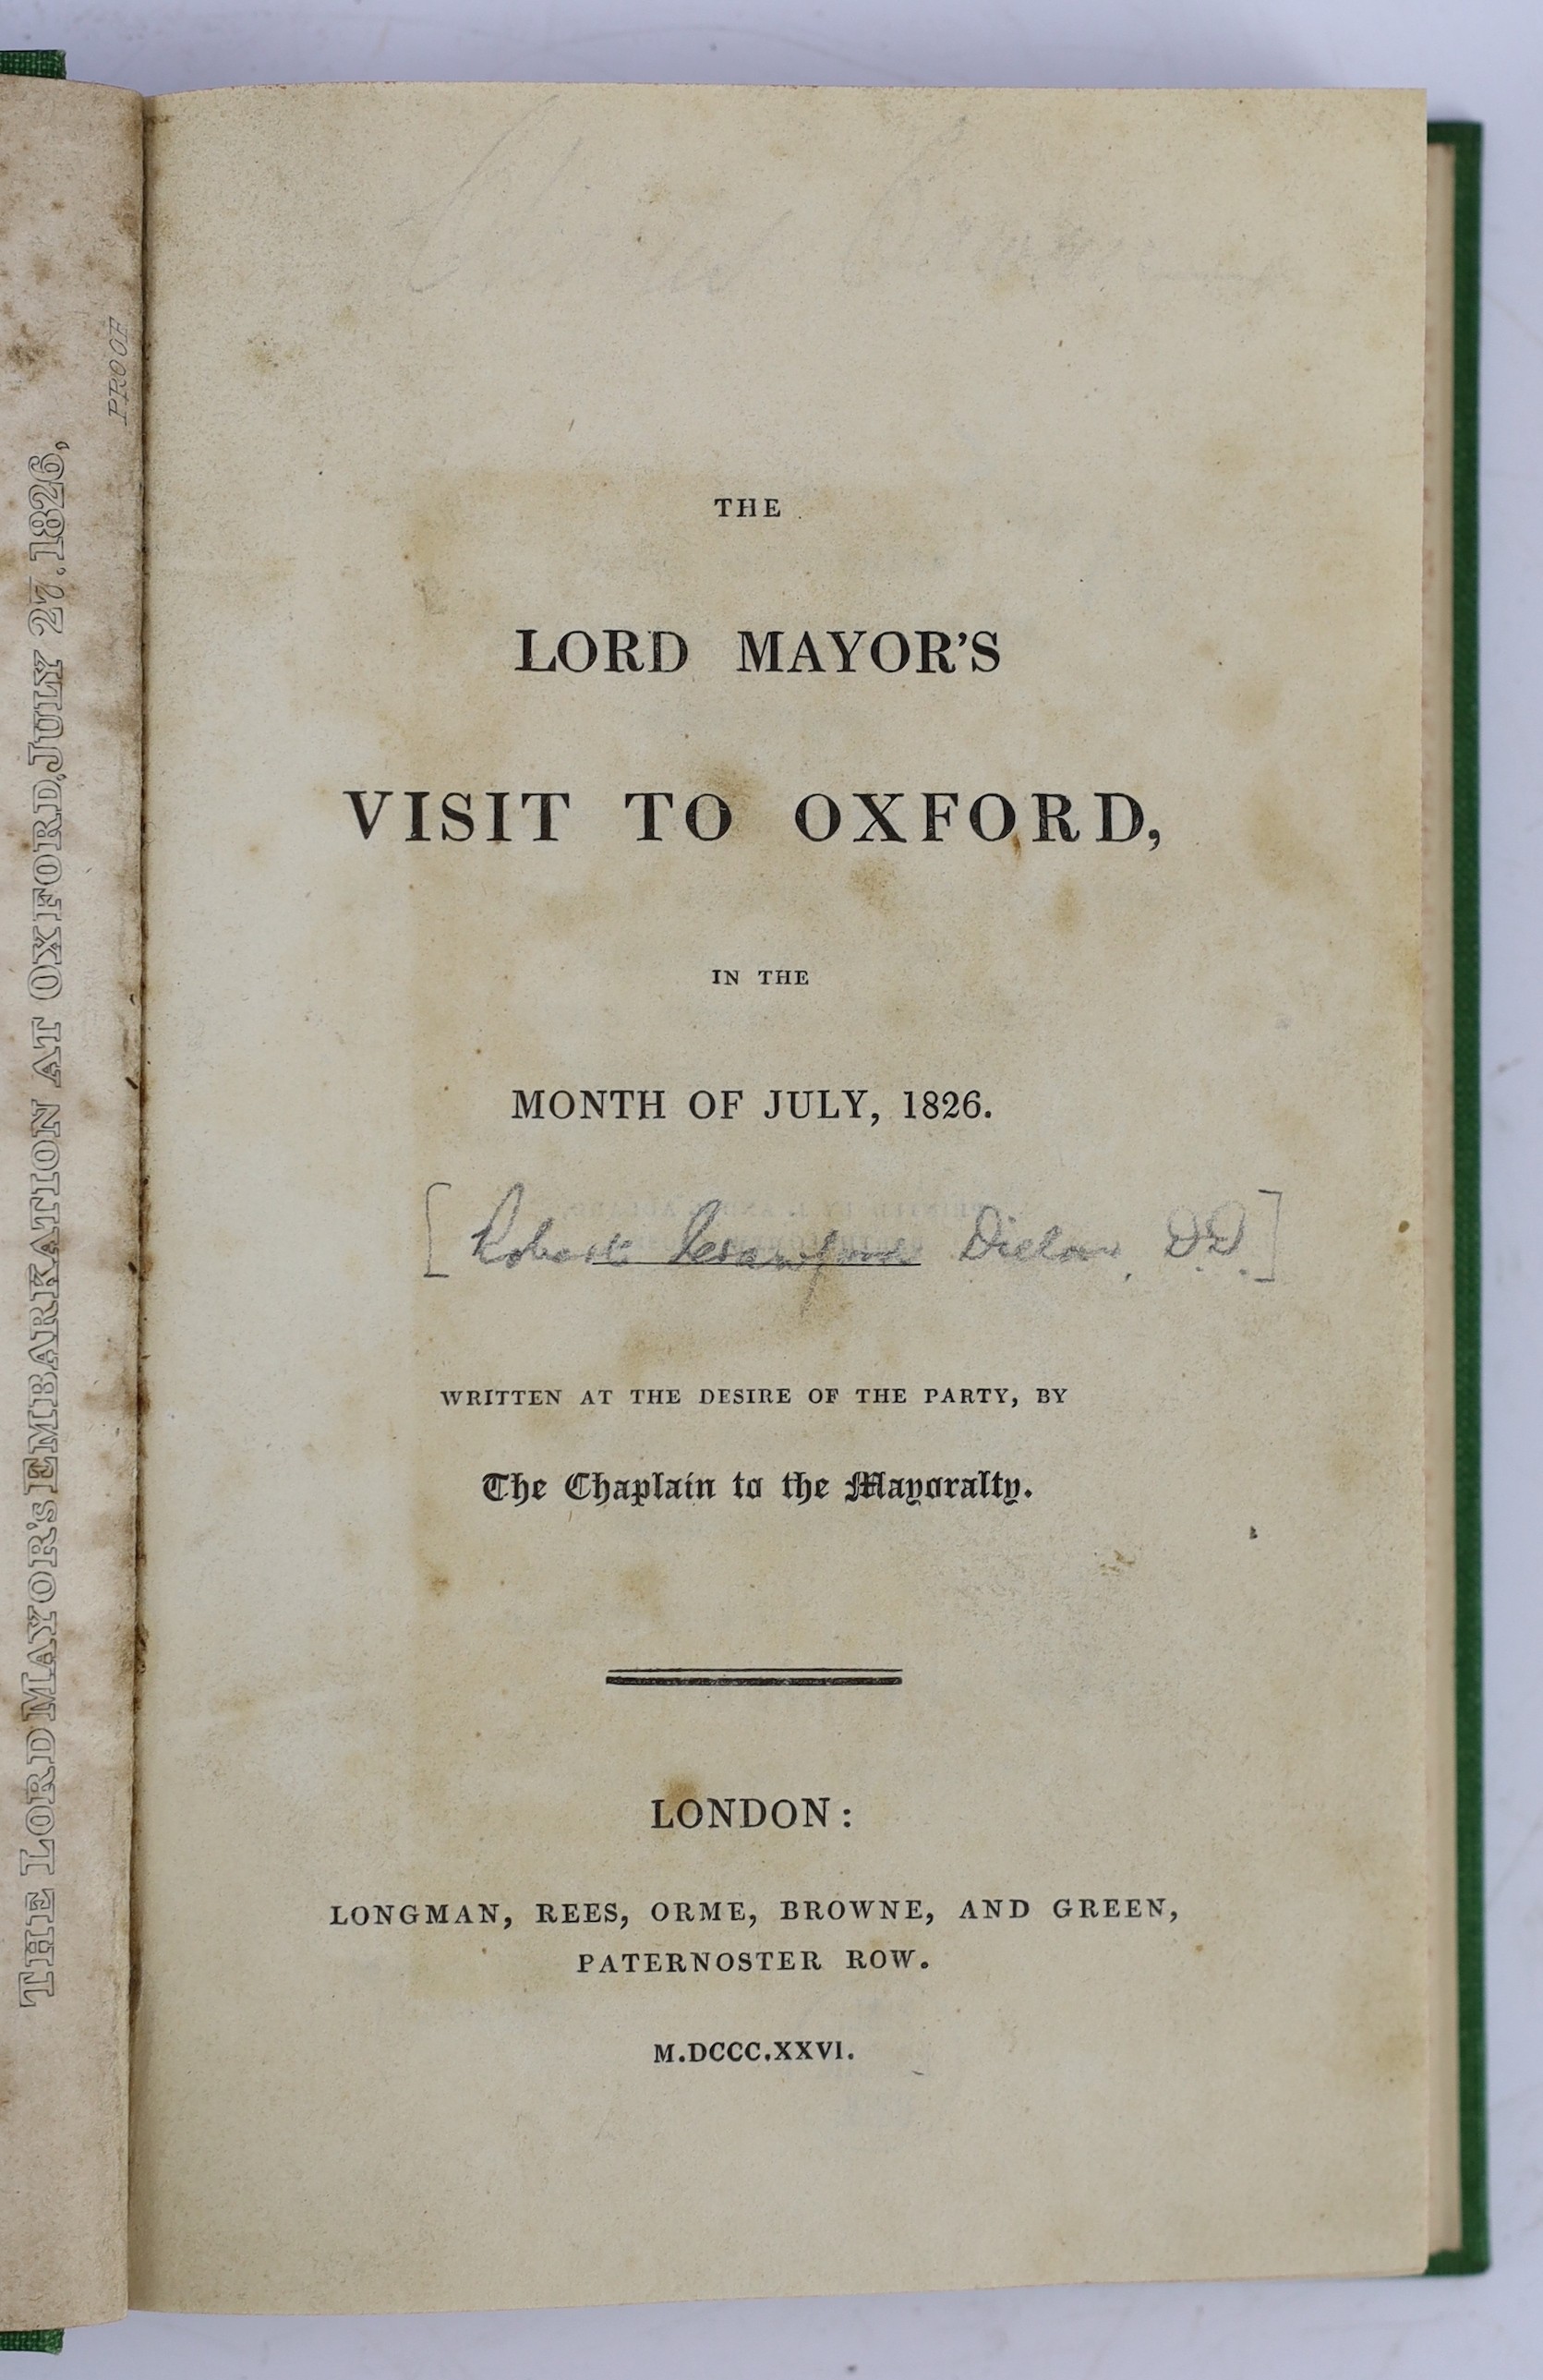 OXON: (Dillon, Rev. Robert Crawford). The Lord Mayor's Visit to Oxford, in the month of July, 1826. Written at the desire of the party, by the Chaplain to the Mayoratty. 2 plates; rebound cloth, sm. 8vo. 1826